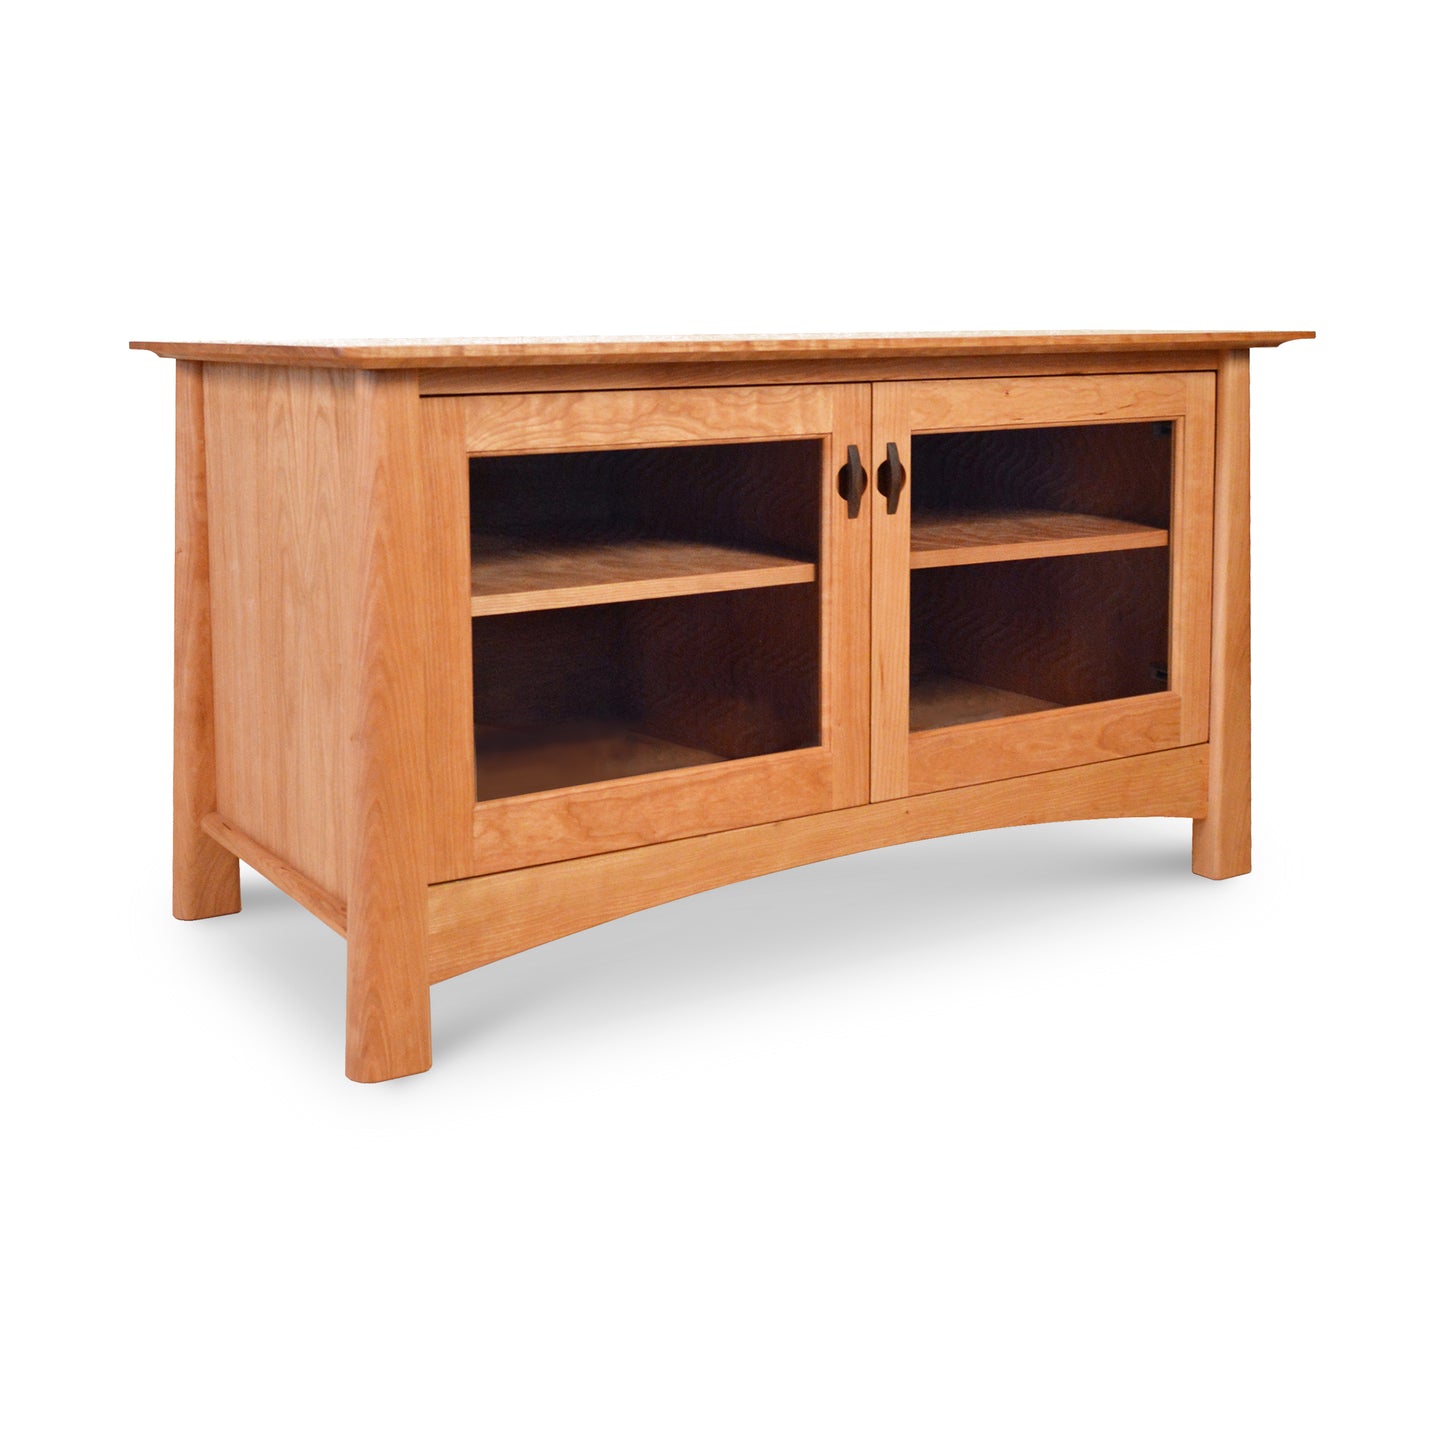 A Maple Corner Woodworks Cherry Moon 49" TV-Media Console with glass doors.